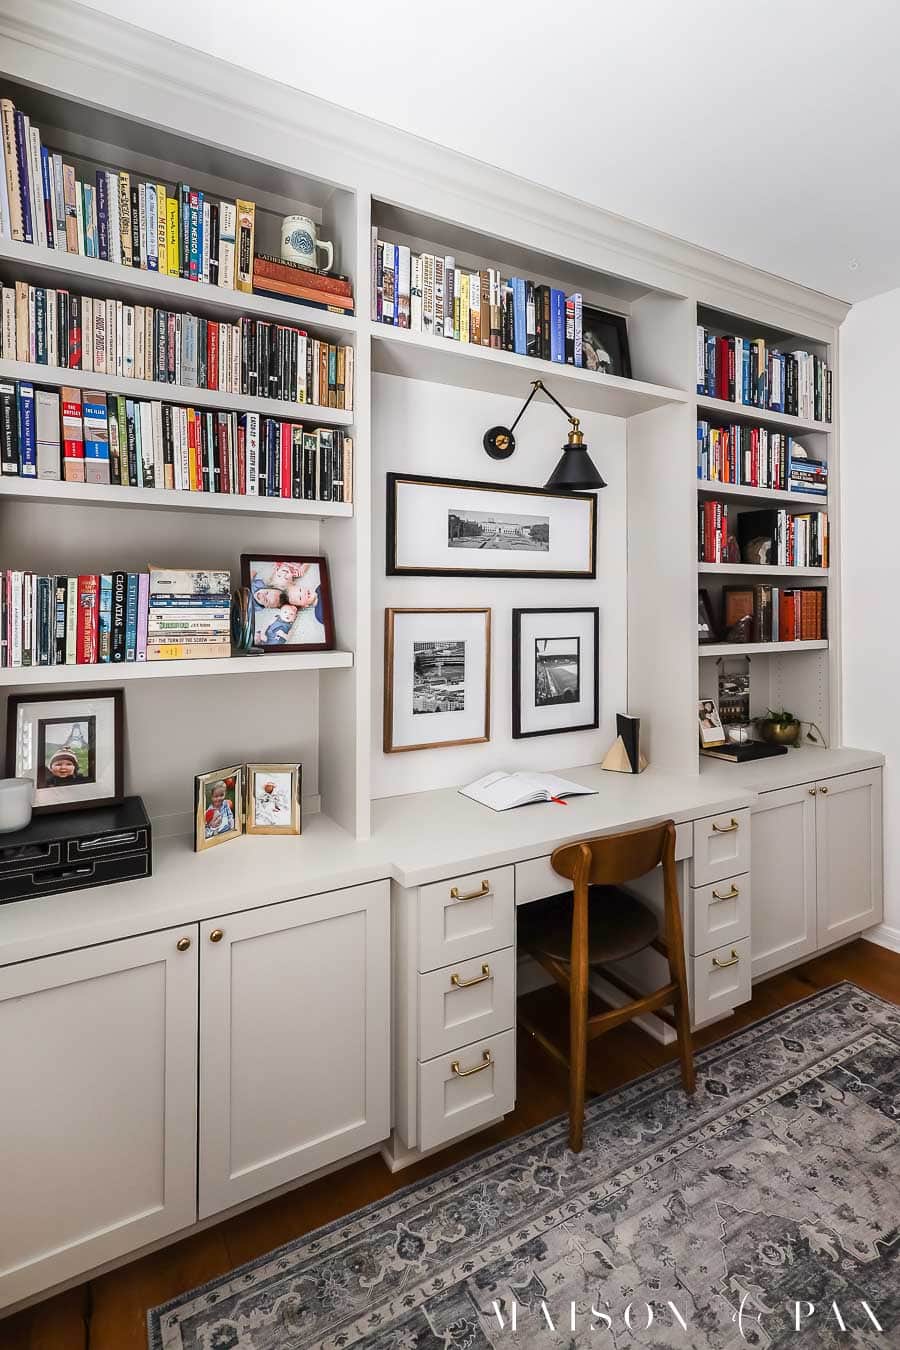 wall with built in desk and cabinets with bookcases to ceiling